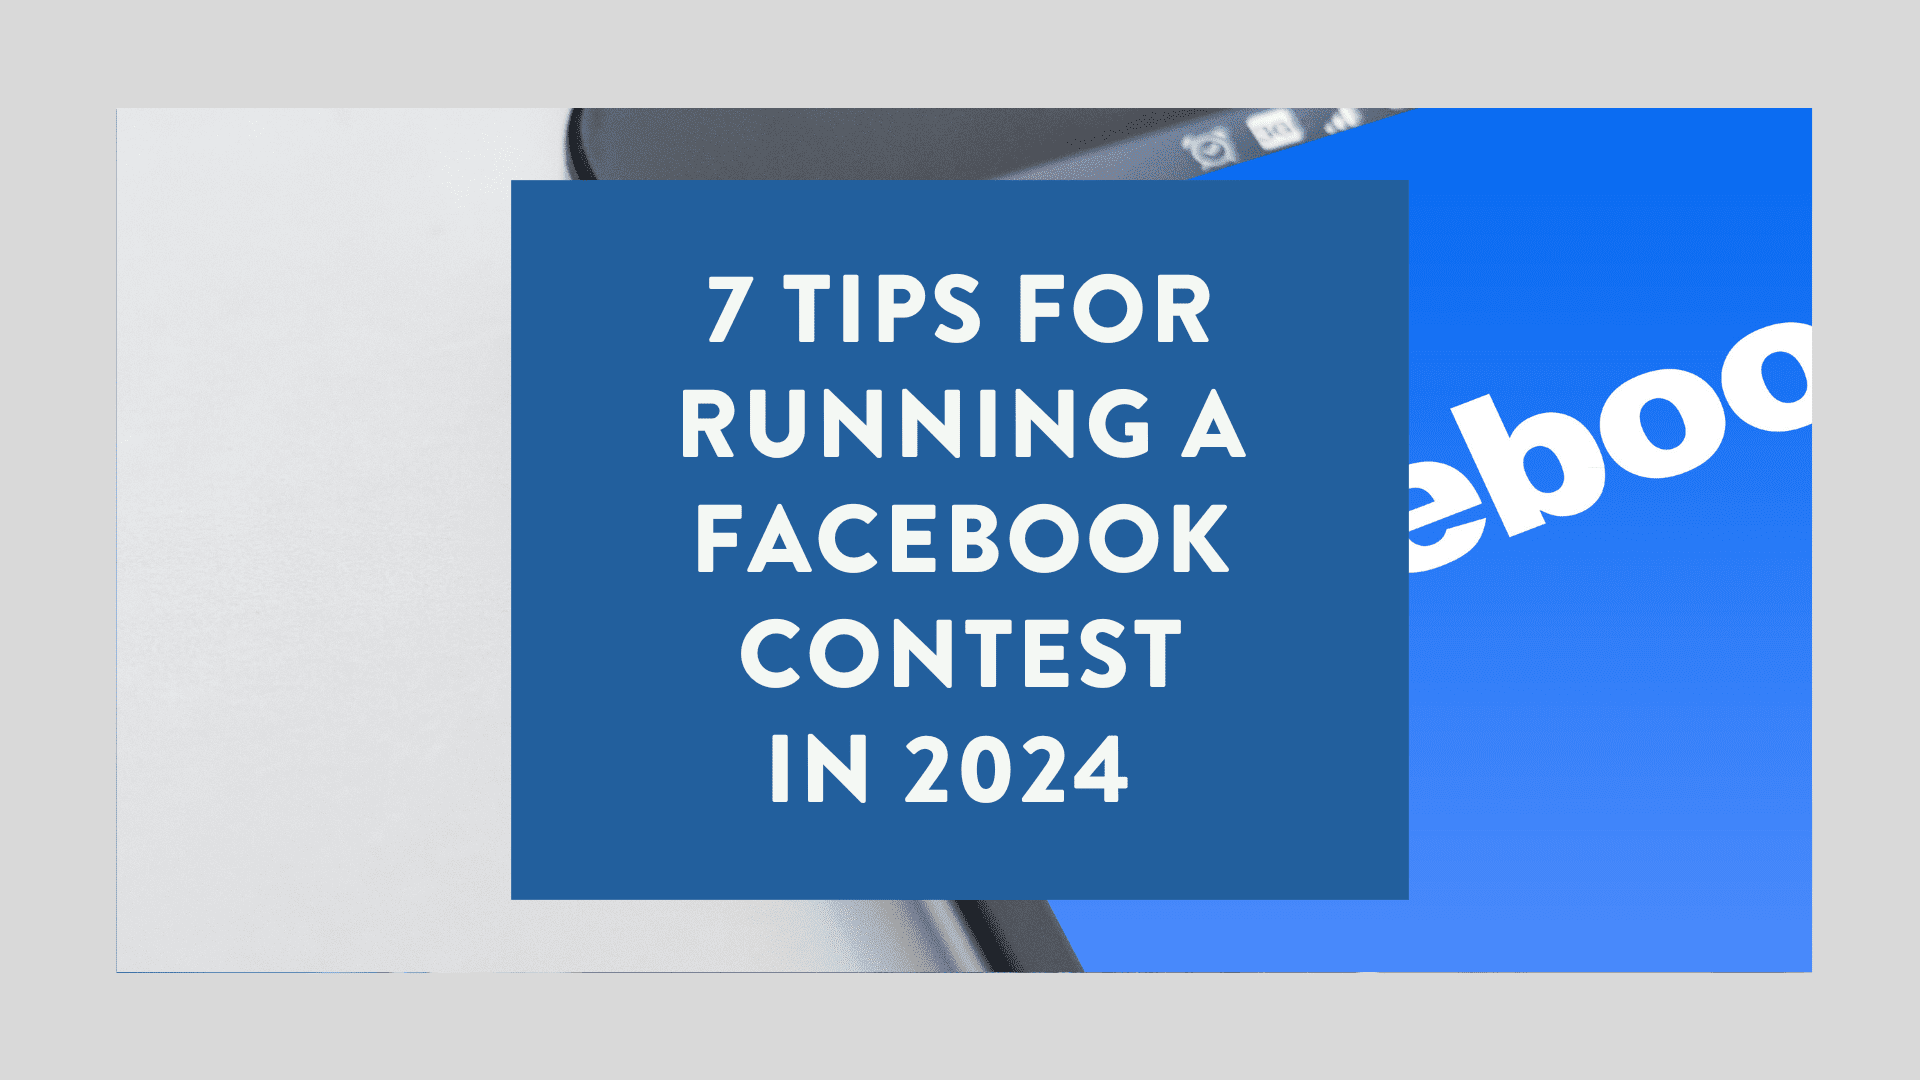 7 Tips for Running a Facebook Contest in 2024